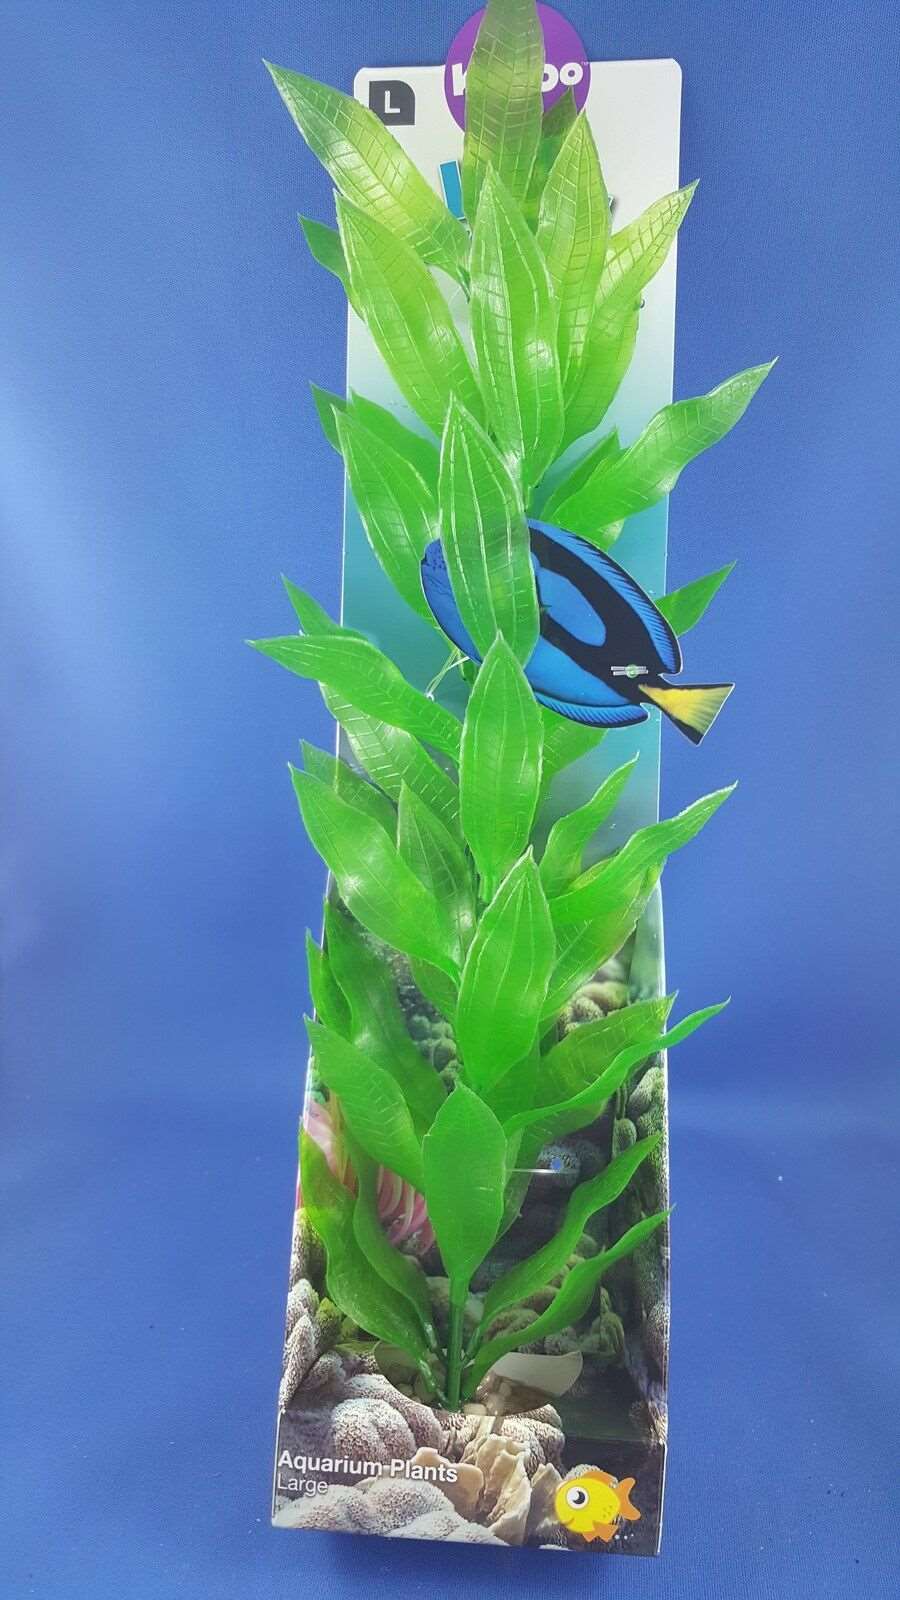 New Kazoo aquarium plant, large with long green leaves with solid pebble base